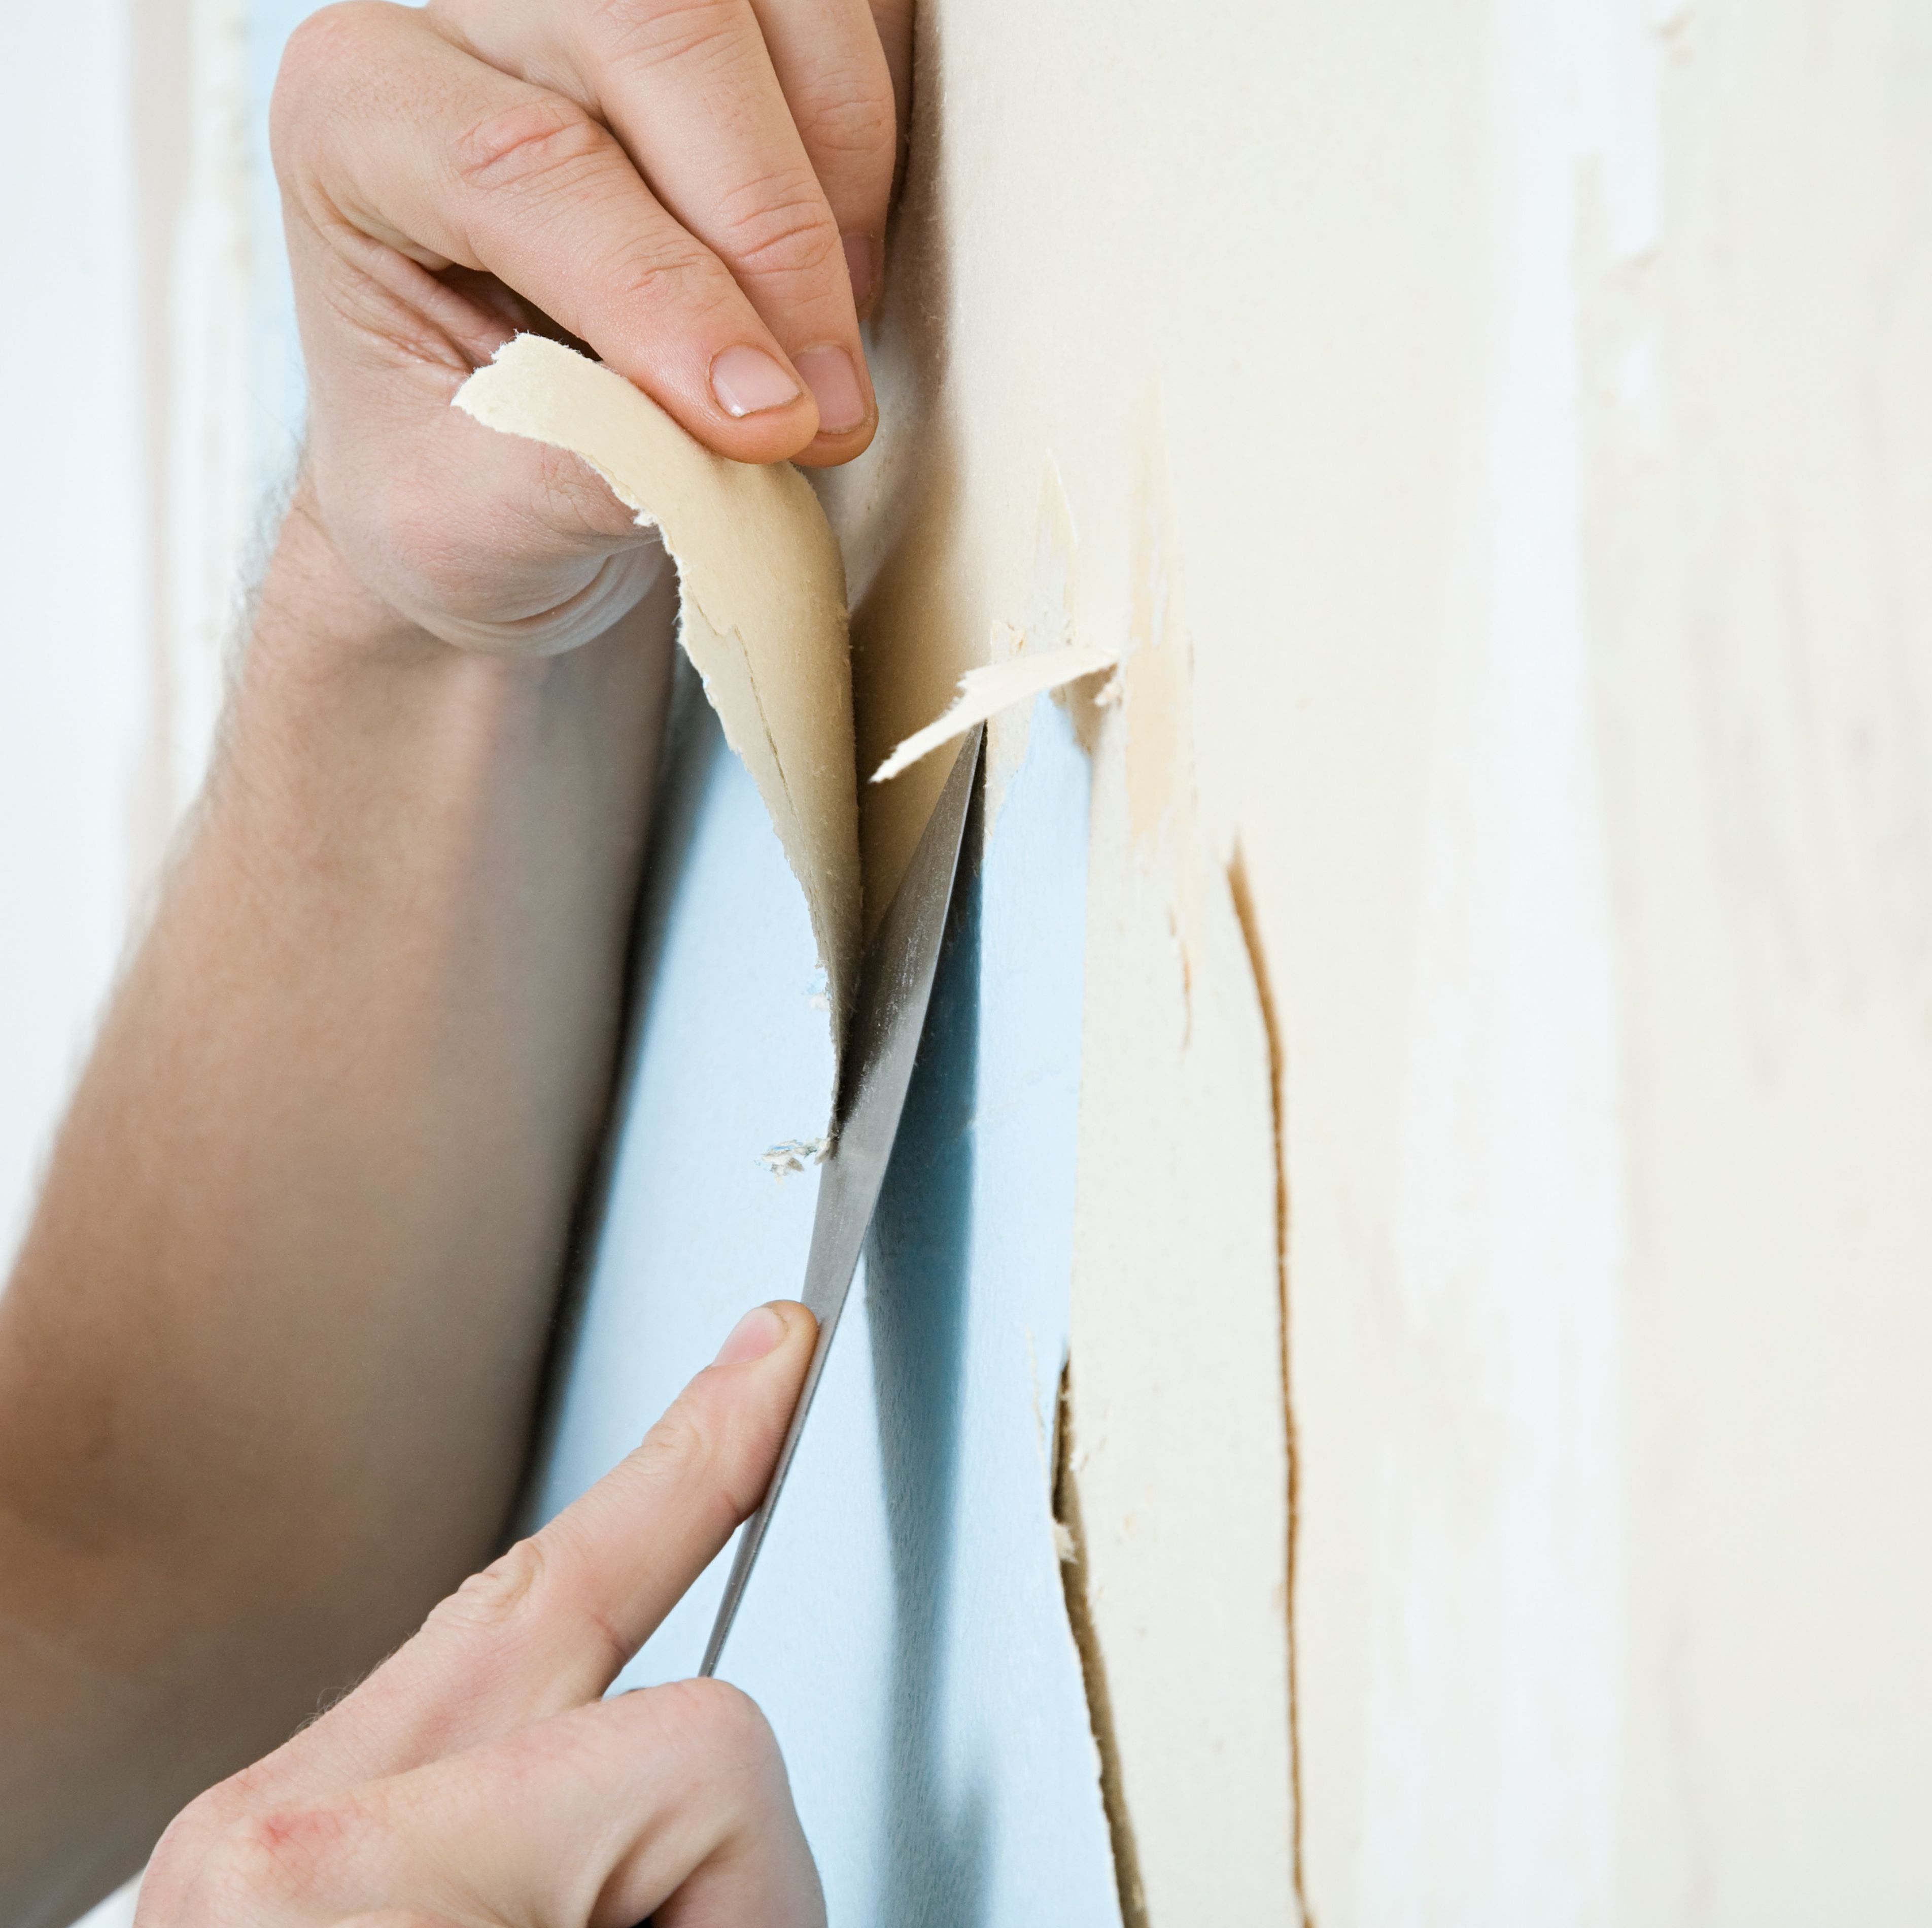 When That Wallpaper Has to Go, Follow These Steps to Remove It Easily